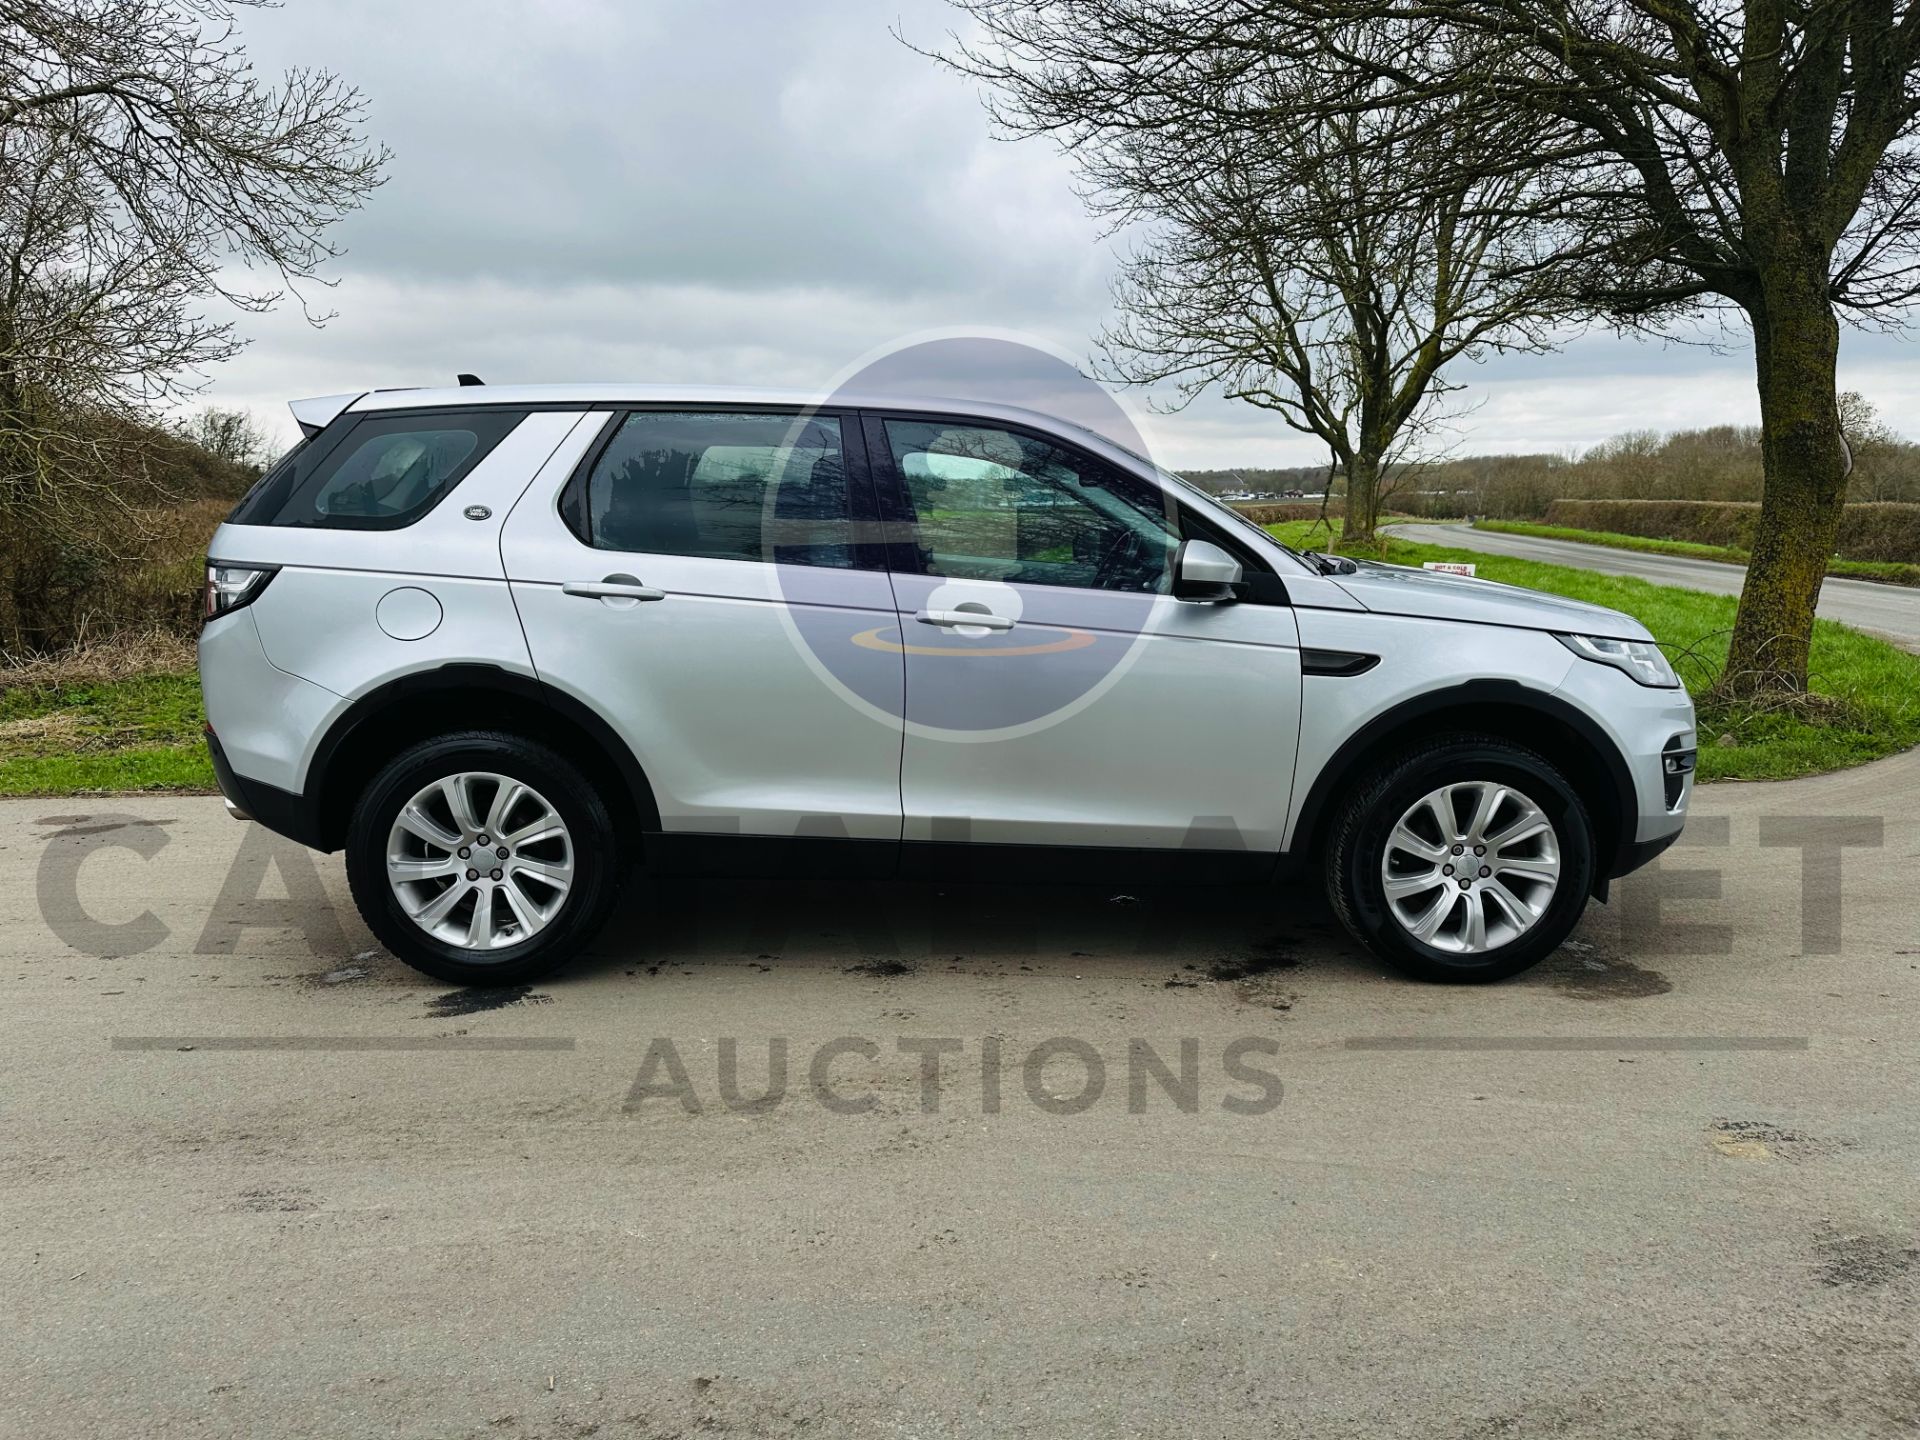 LAND ROVER DISCOVERY SPORT *SE TECH* 7 SEATER SUV (65 REG - EURO 6) 2.0 TD4 - AUTOMATIC - Image 10 of 38